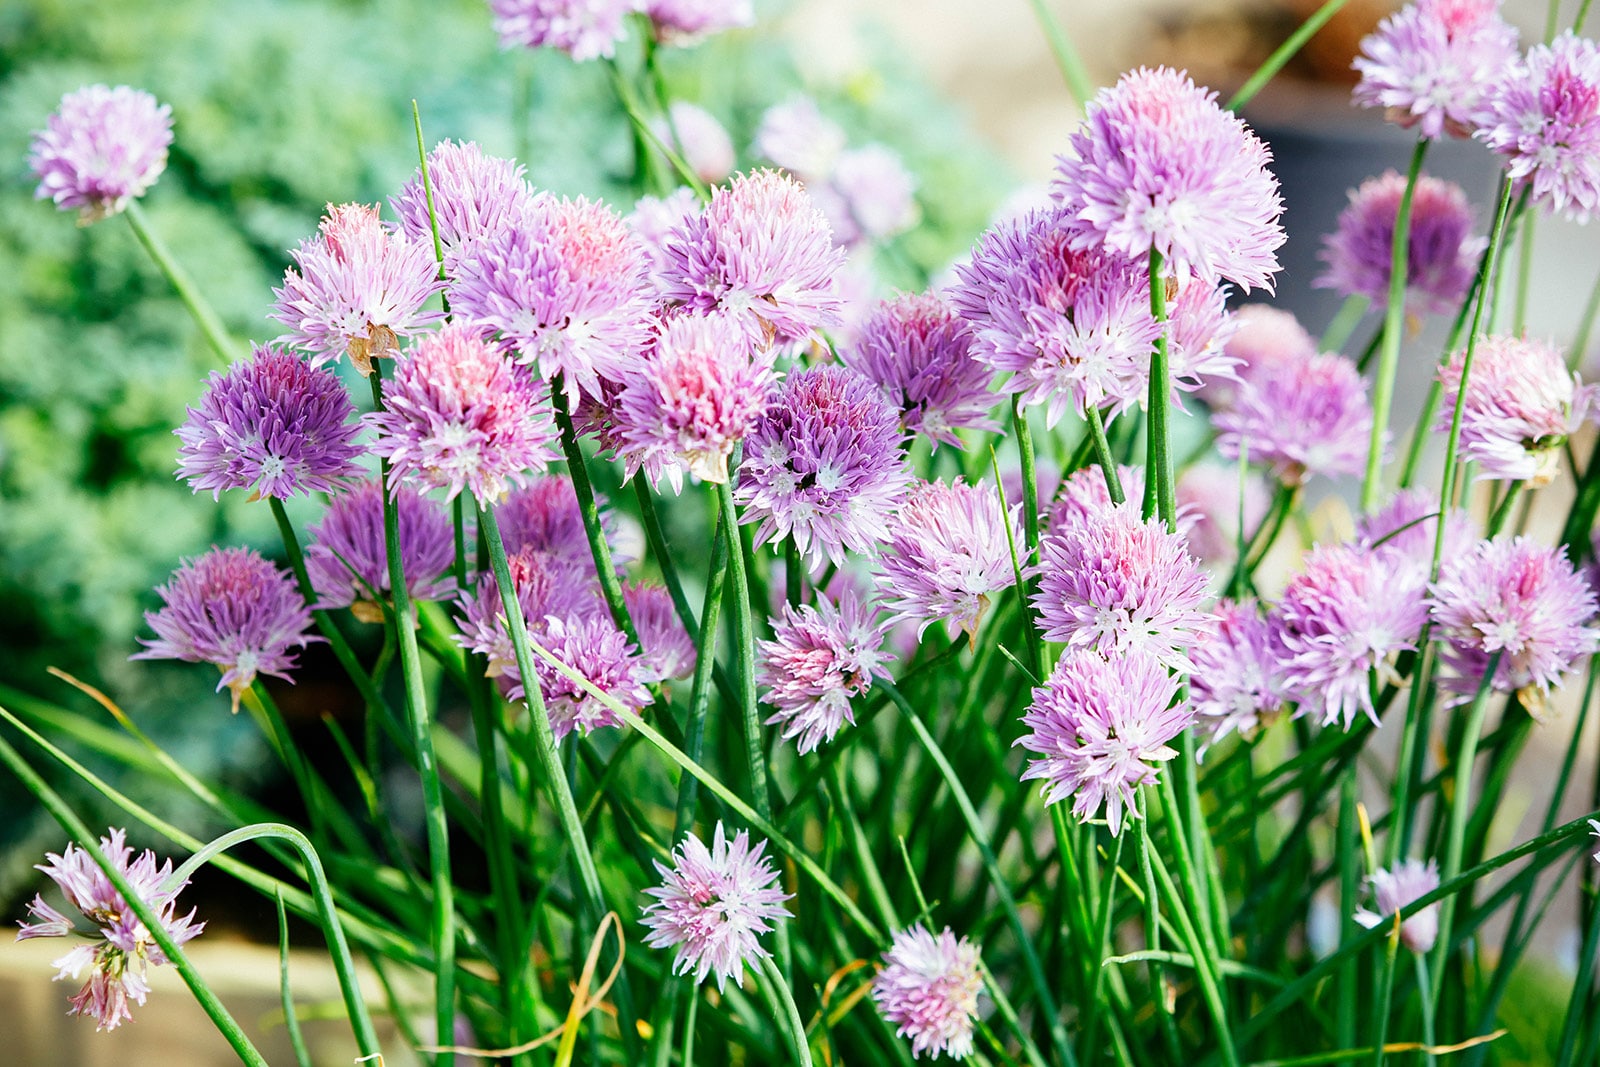 A garden bed full of purple chive flowers